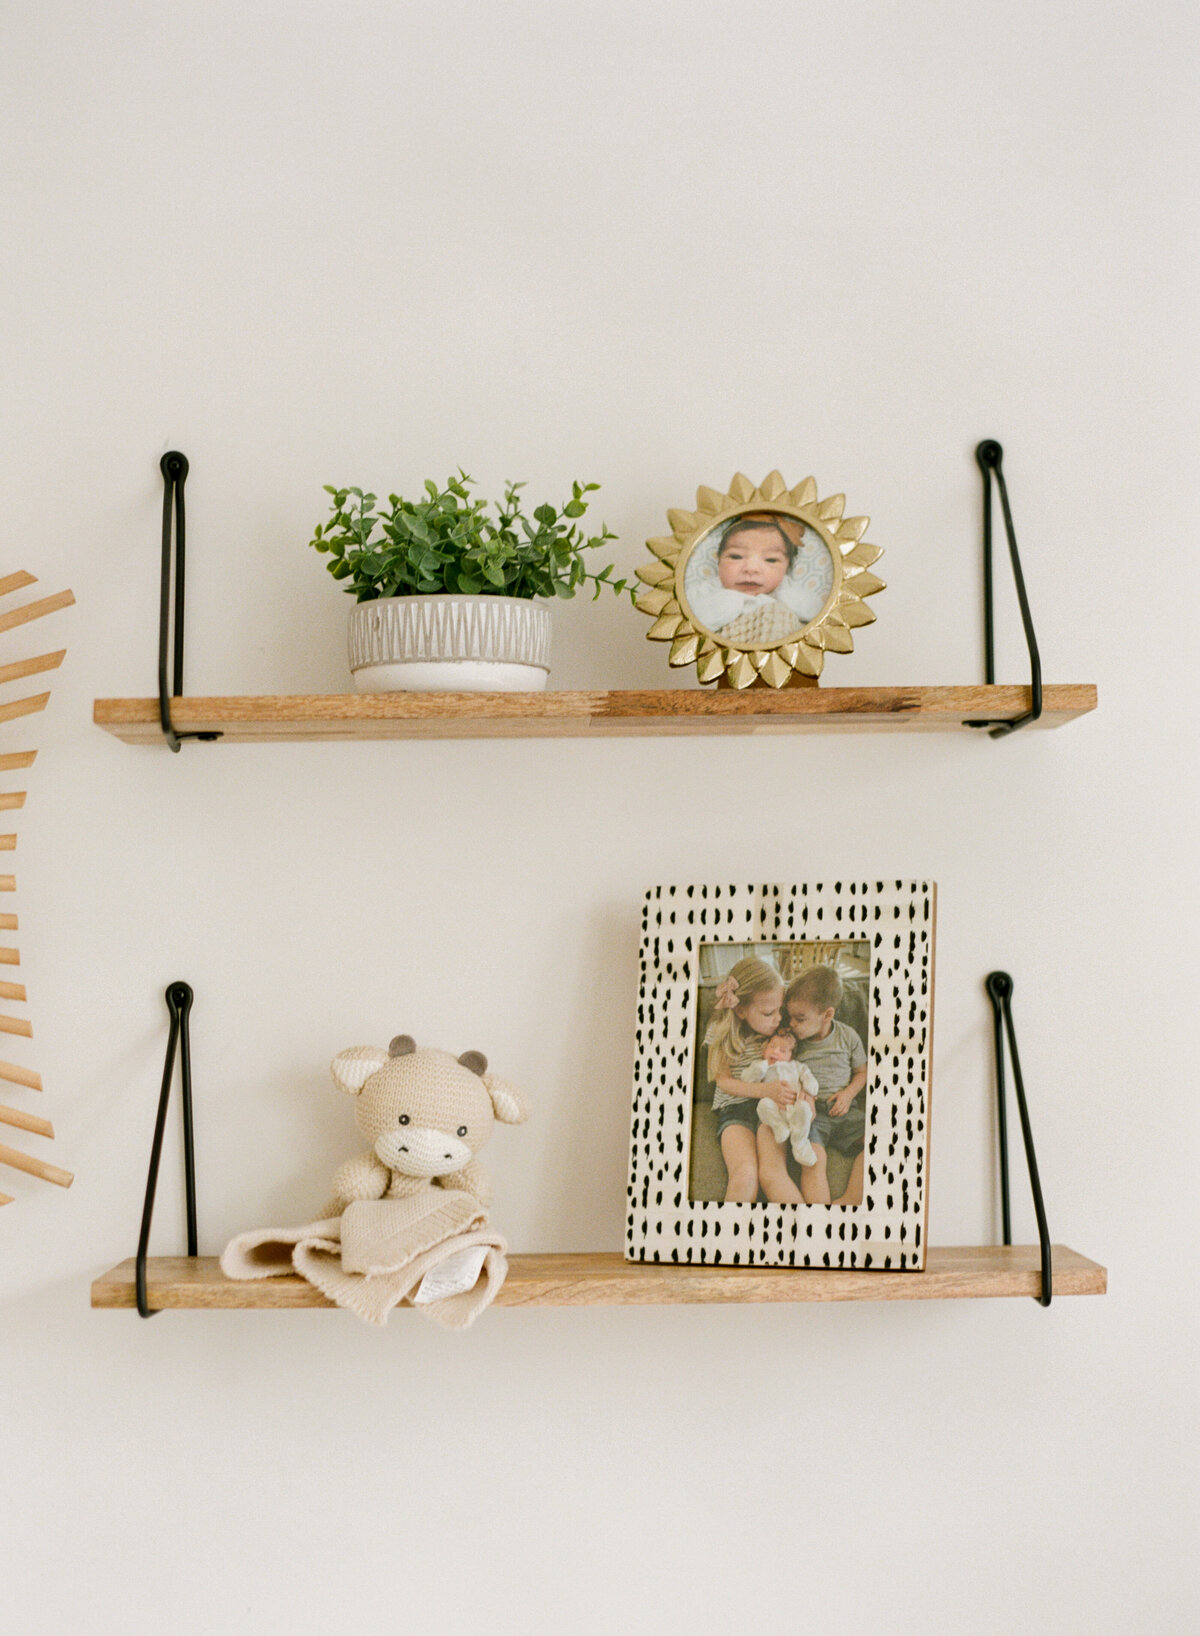 Wood shelves with black hangers are styled beautifully for this organic modern nursery in Raleigh NC. Photographed by newborn photographer Raleigh A.J. Dunlap Photography.